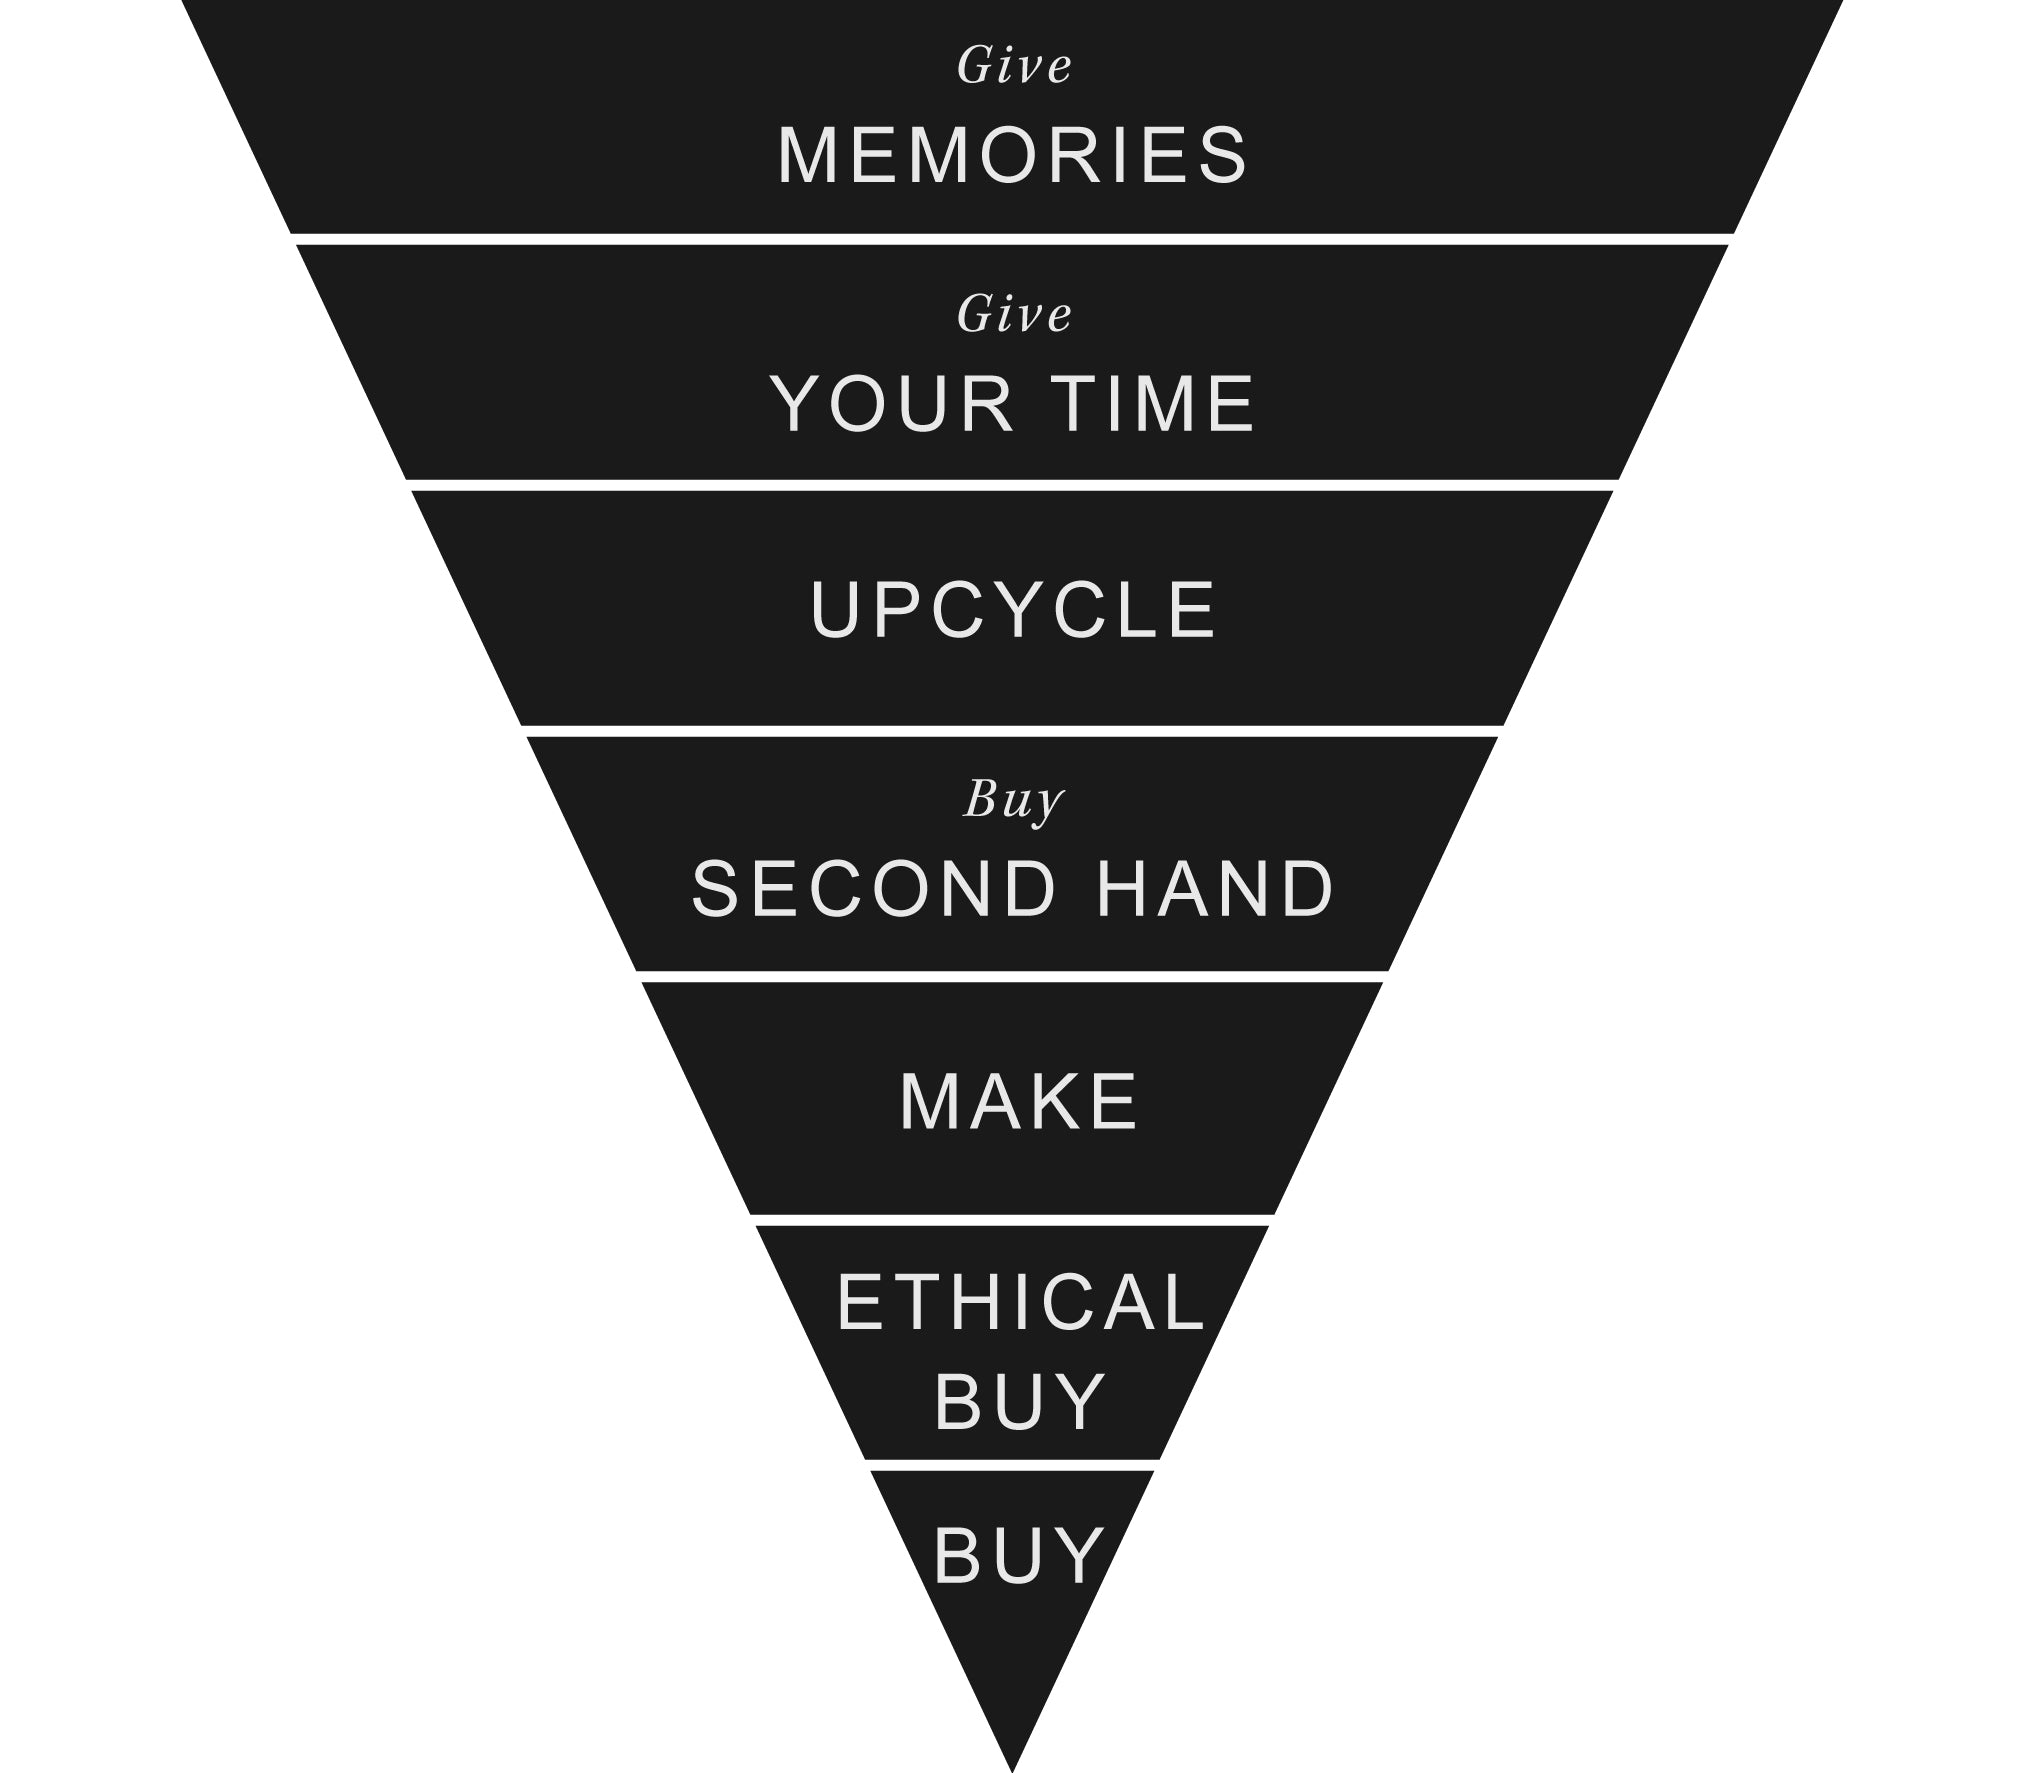 Ethical Hierarchy of Gift Giving